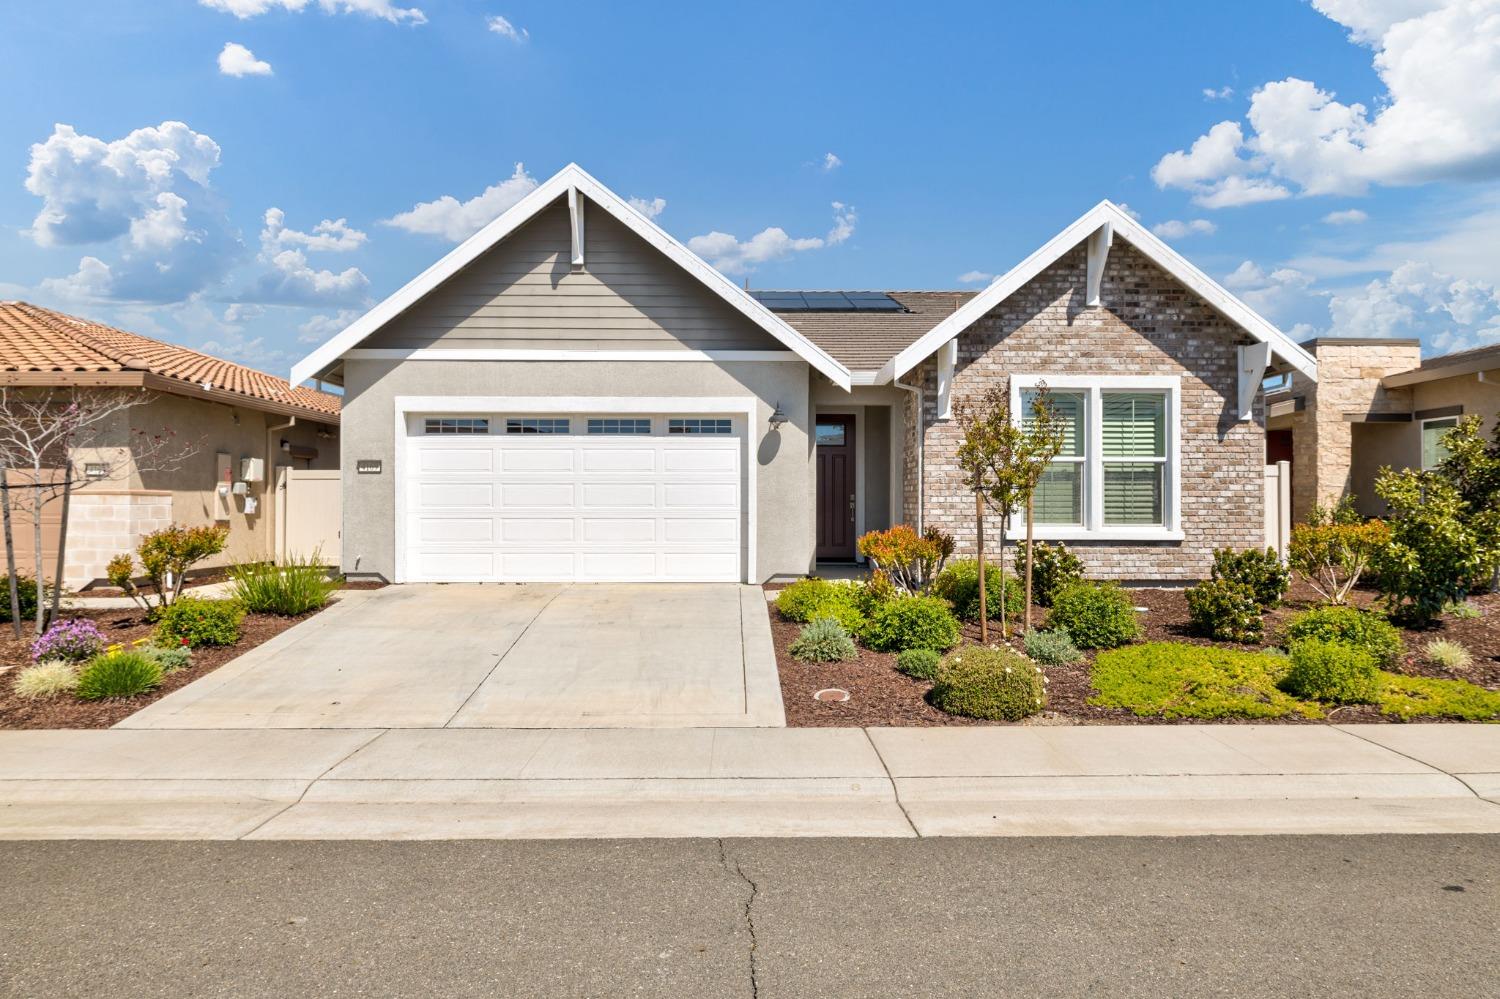 Photo of 4169 Afterlight Ln in Roseville, CA